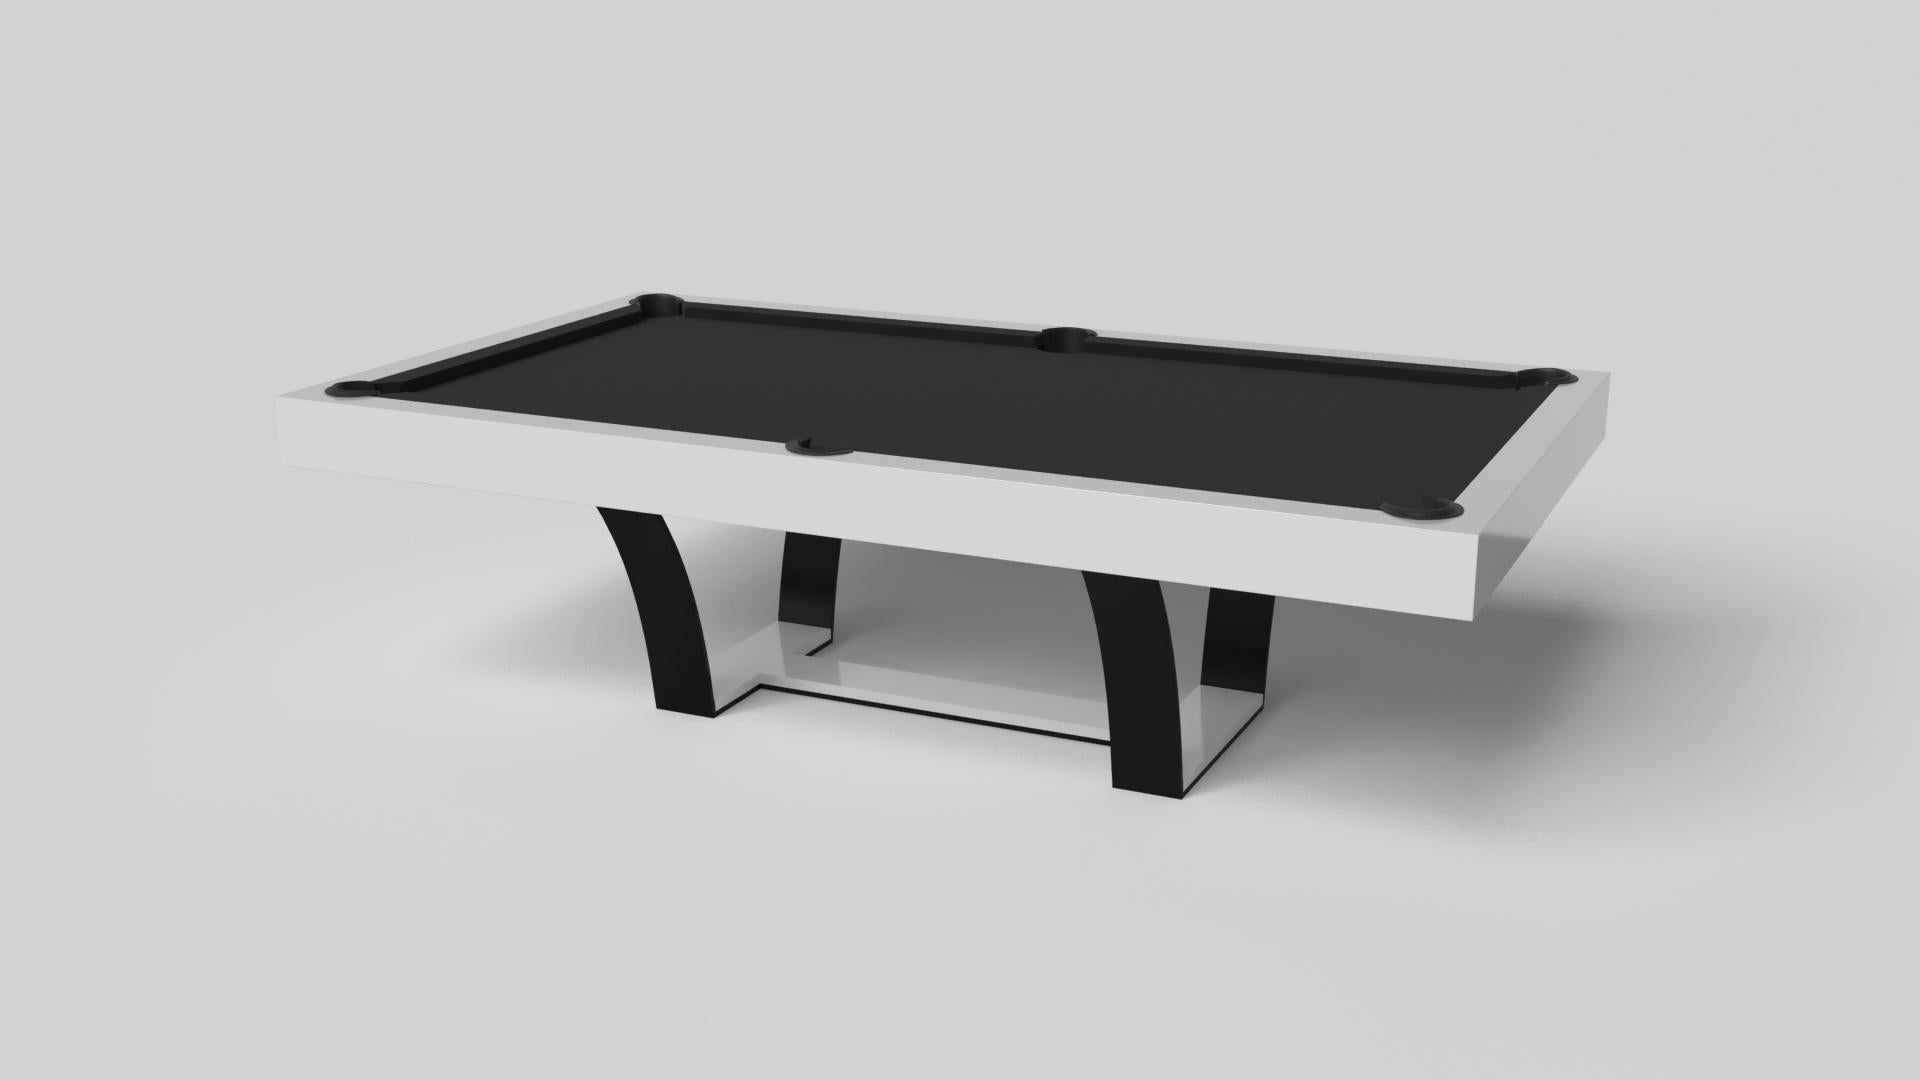 With an I-shaped metal base, slightly sloped metal legs, and a contrasting wood top, the Elite pool table exudes modern sophistication while evoking a sense of art deco design. This table is a confluence of style, made to meet today's demands and